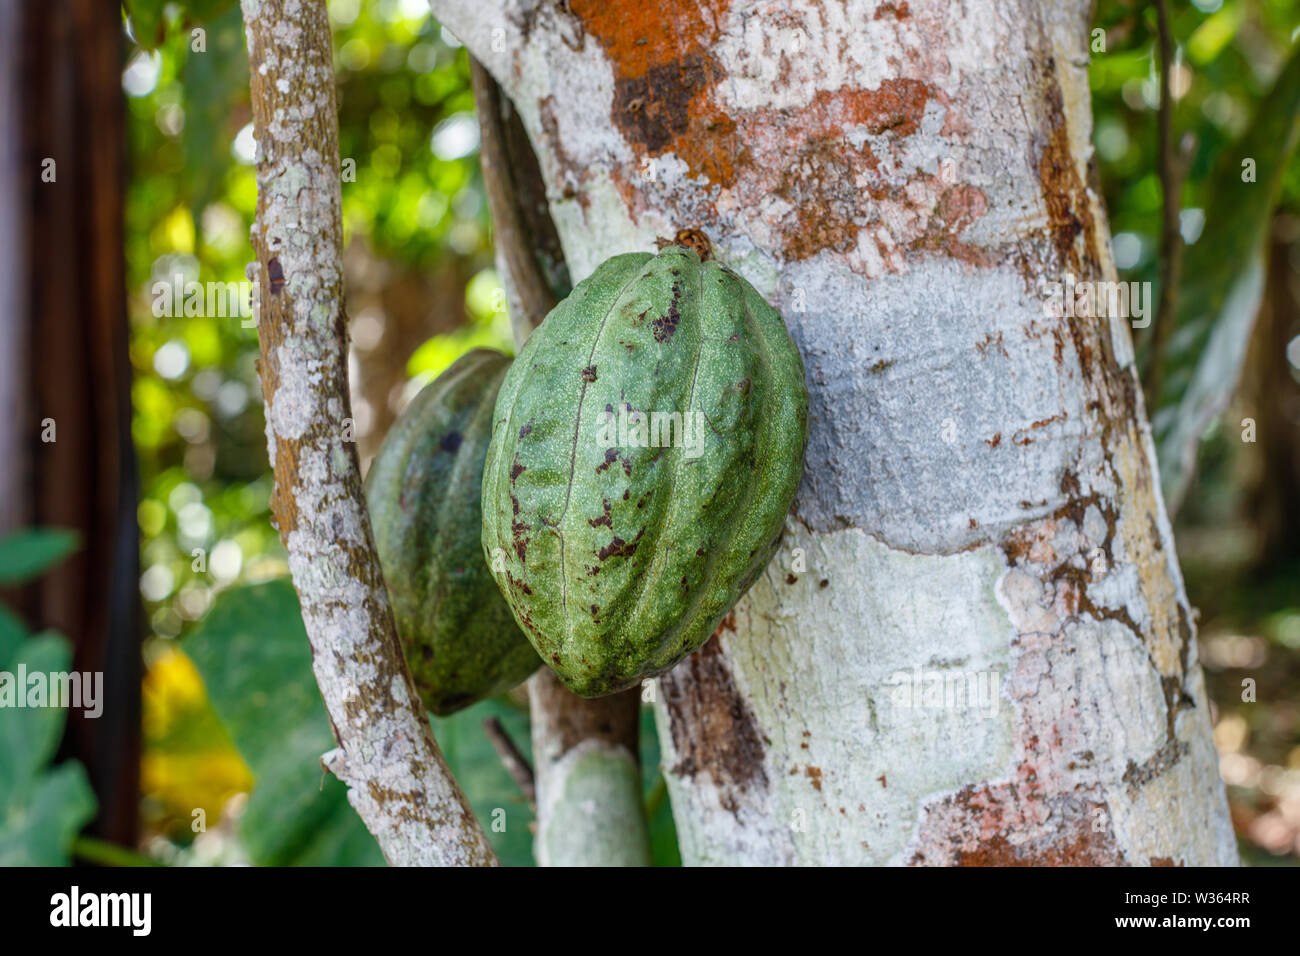 Cocoa (cacao) pods growing on Theobroma cacao tree. Bali, Indonesia. Stock Photo